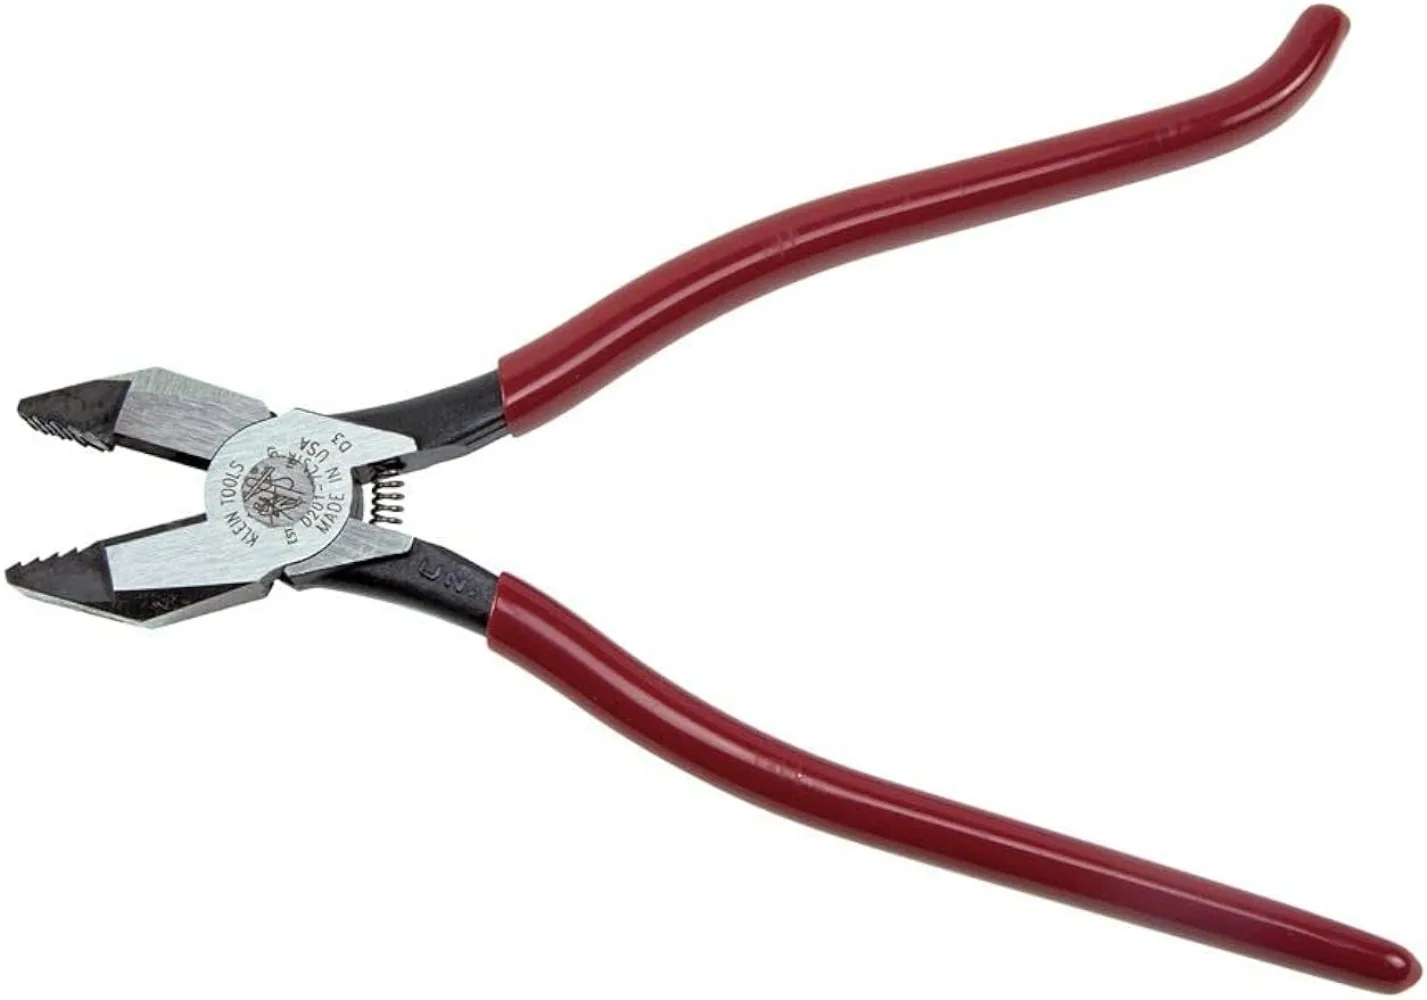 

Klein Tools D201-7CSTA Linesman Pliers, Side Cutters with Spring Loaded Action, Ironworker Pliers have Aggressive Knurl